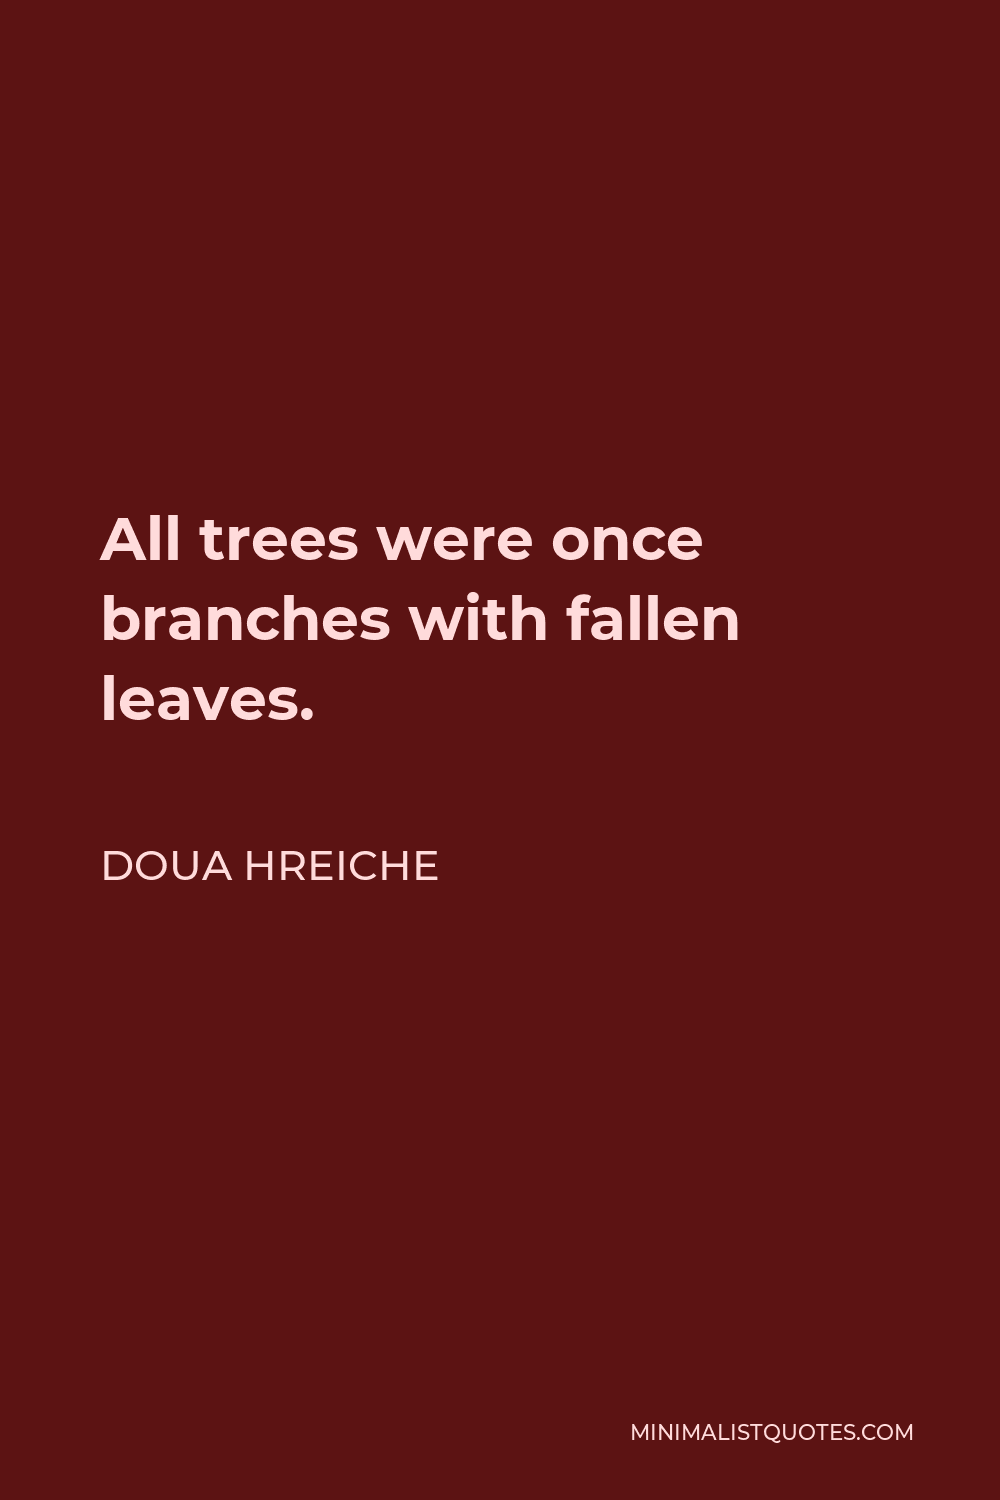 Doua Hreiche Quote - All trees were once branches with fallen leaves.